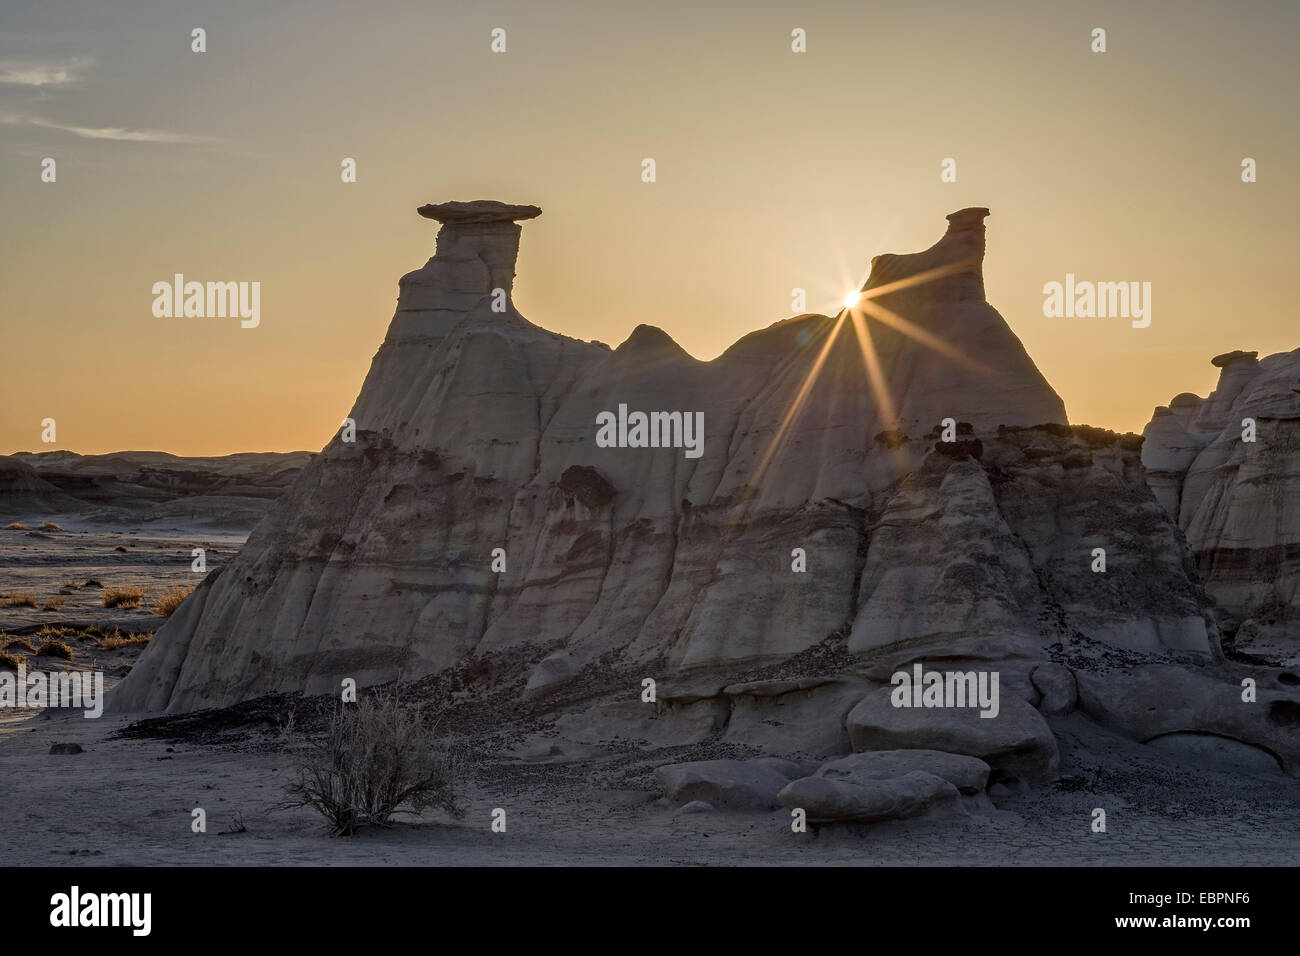 Sunburst behind a rock formation, Bisti Wilderness, New Mexico, United States of America, North America Stock Photo